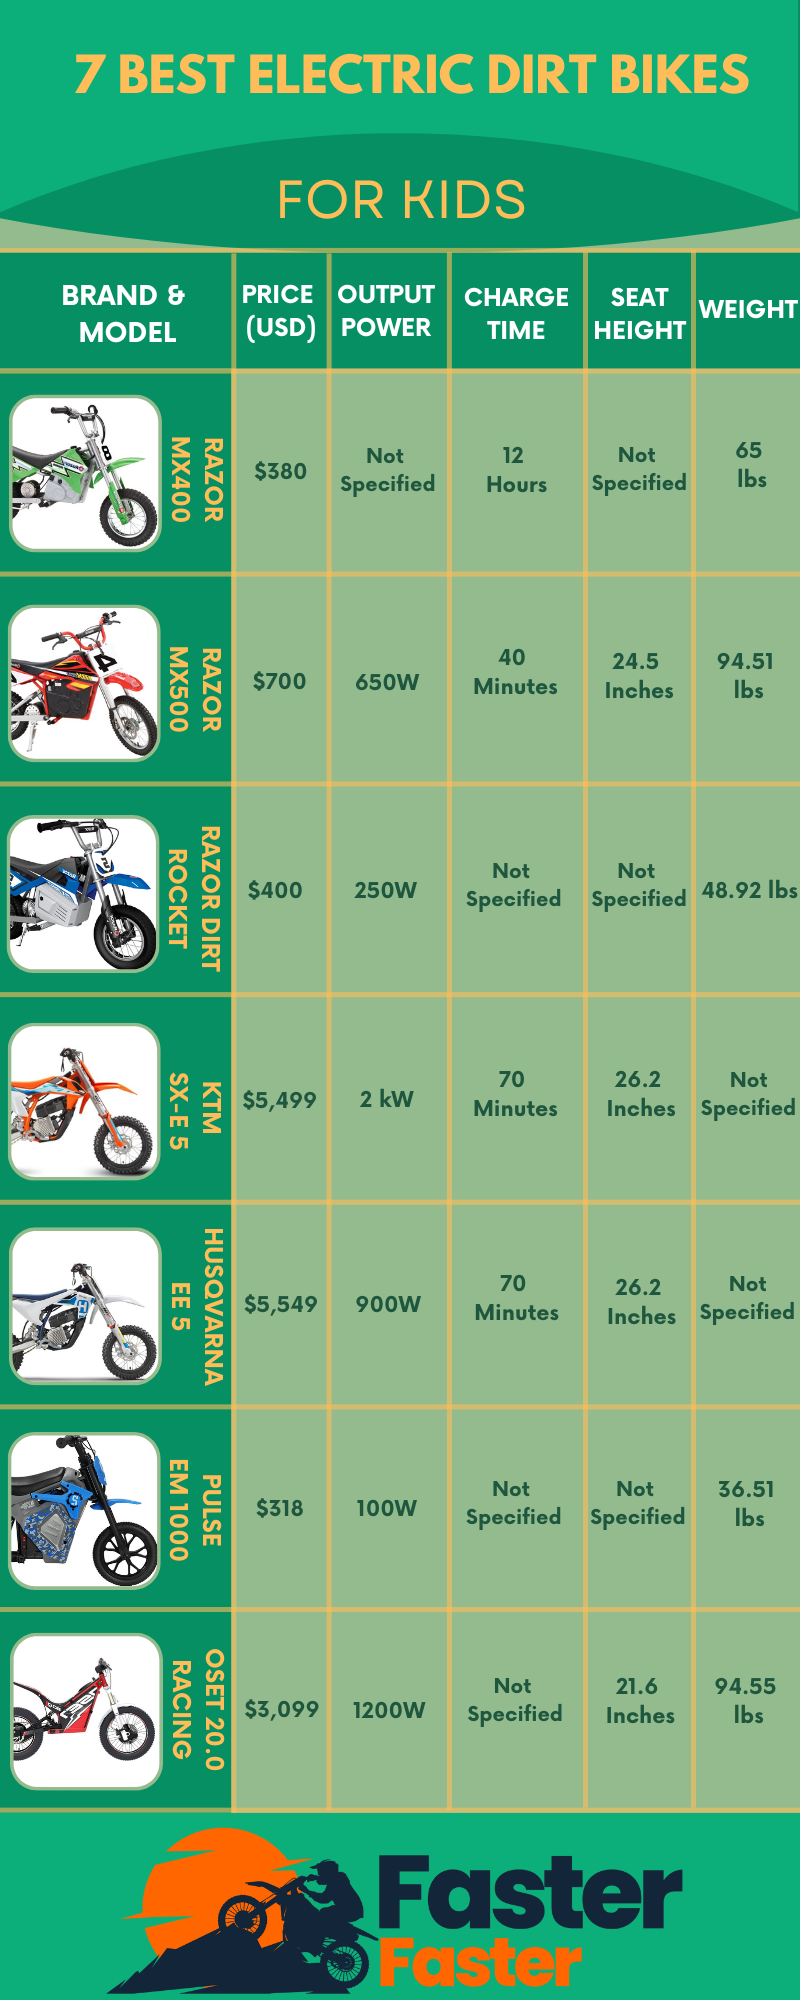 7 Best Electric Dirt Bikes For Kids infographics